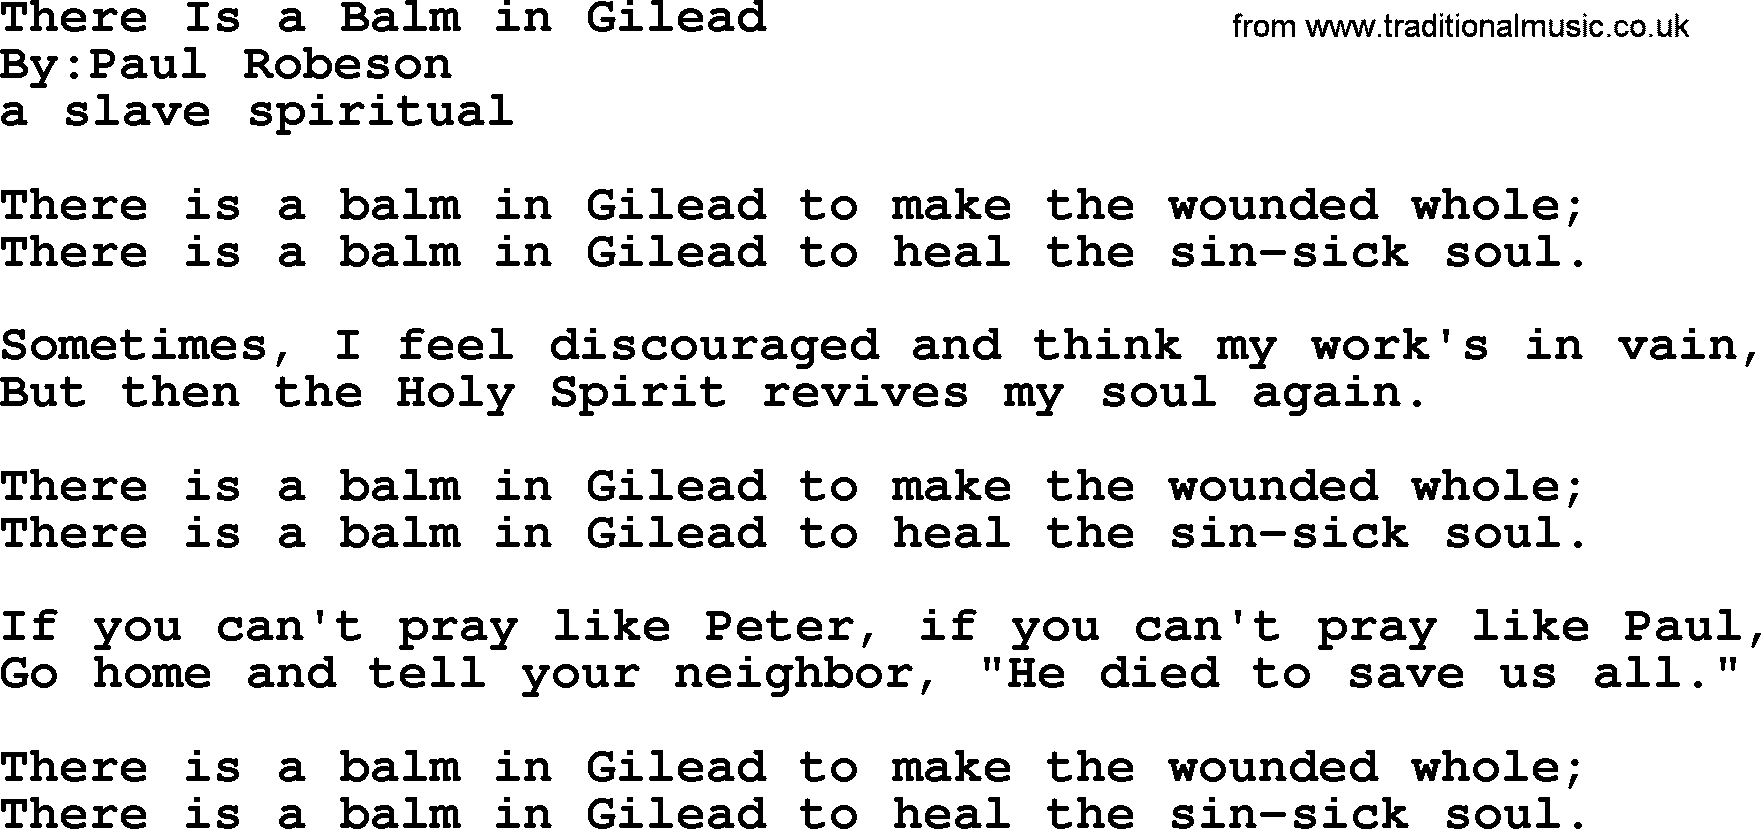 Political, Solidarity, Workers or Union song: There Is A Balm In Gilead, lyrics